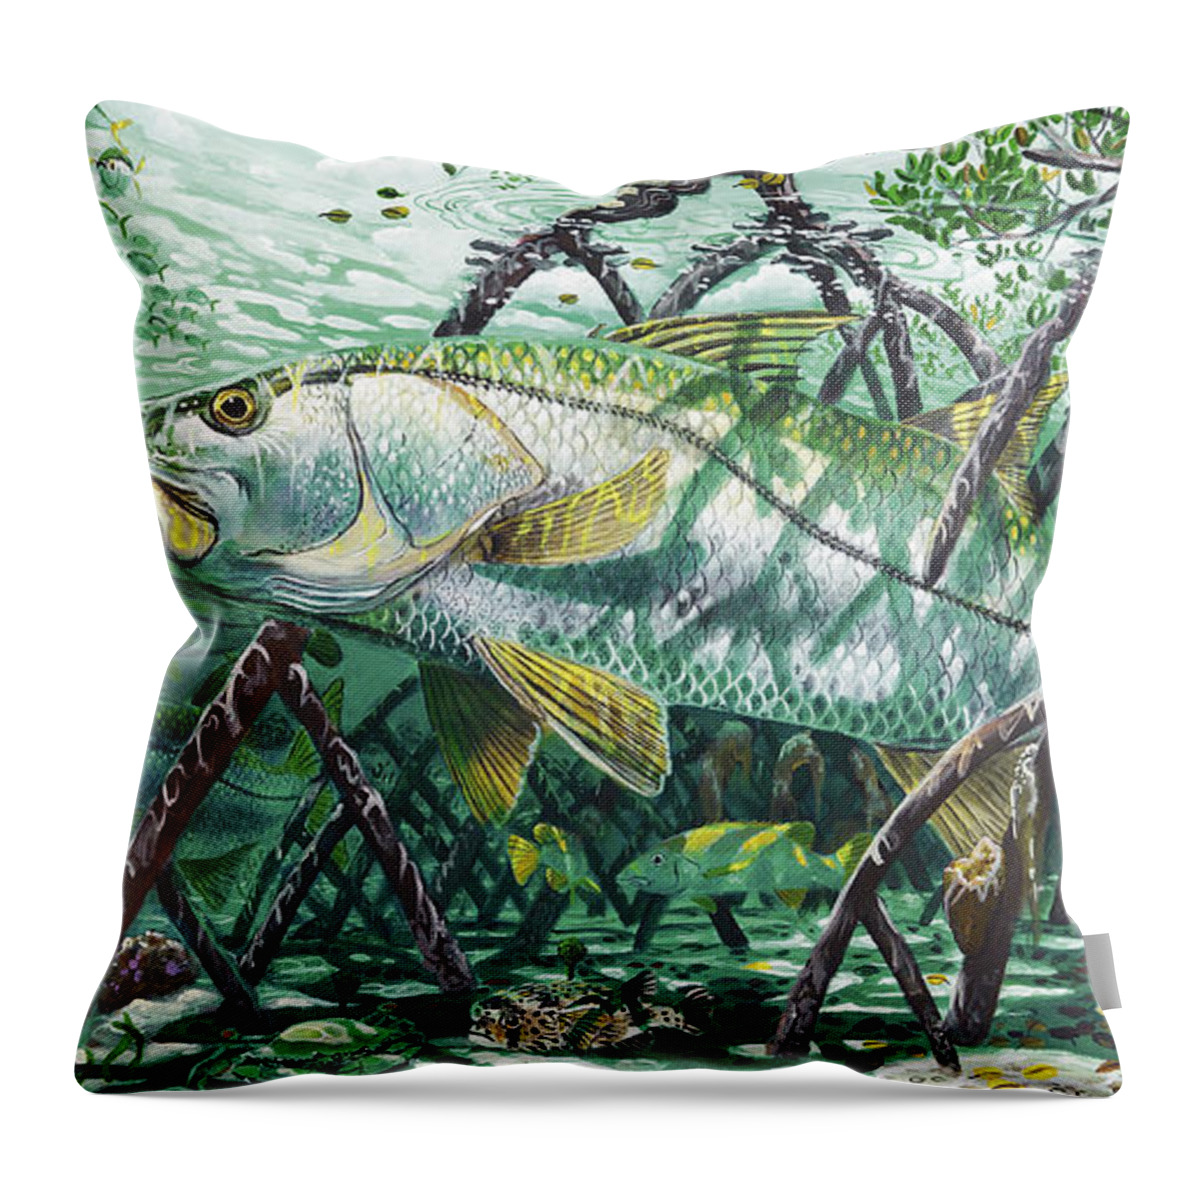 Snook Throw Pillow featuring the painting Undercover In0022 by Carey Chen